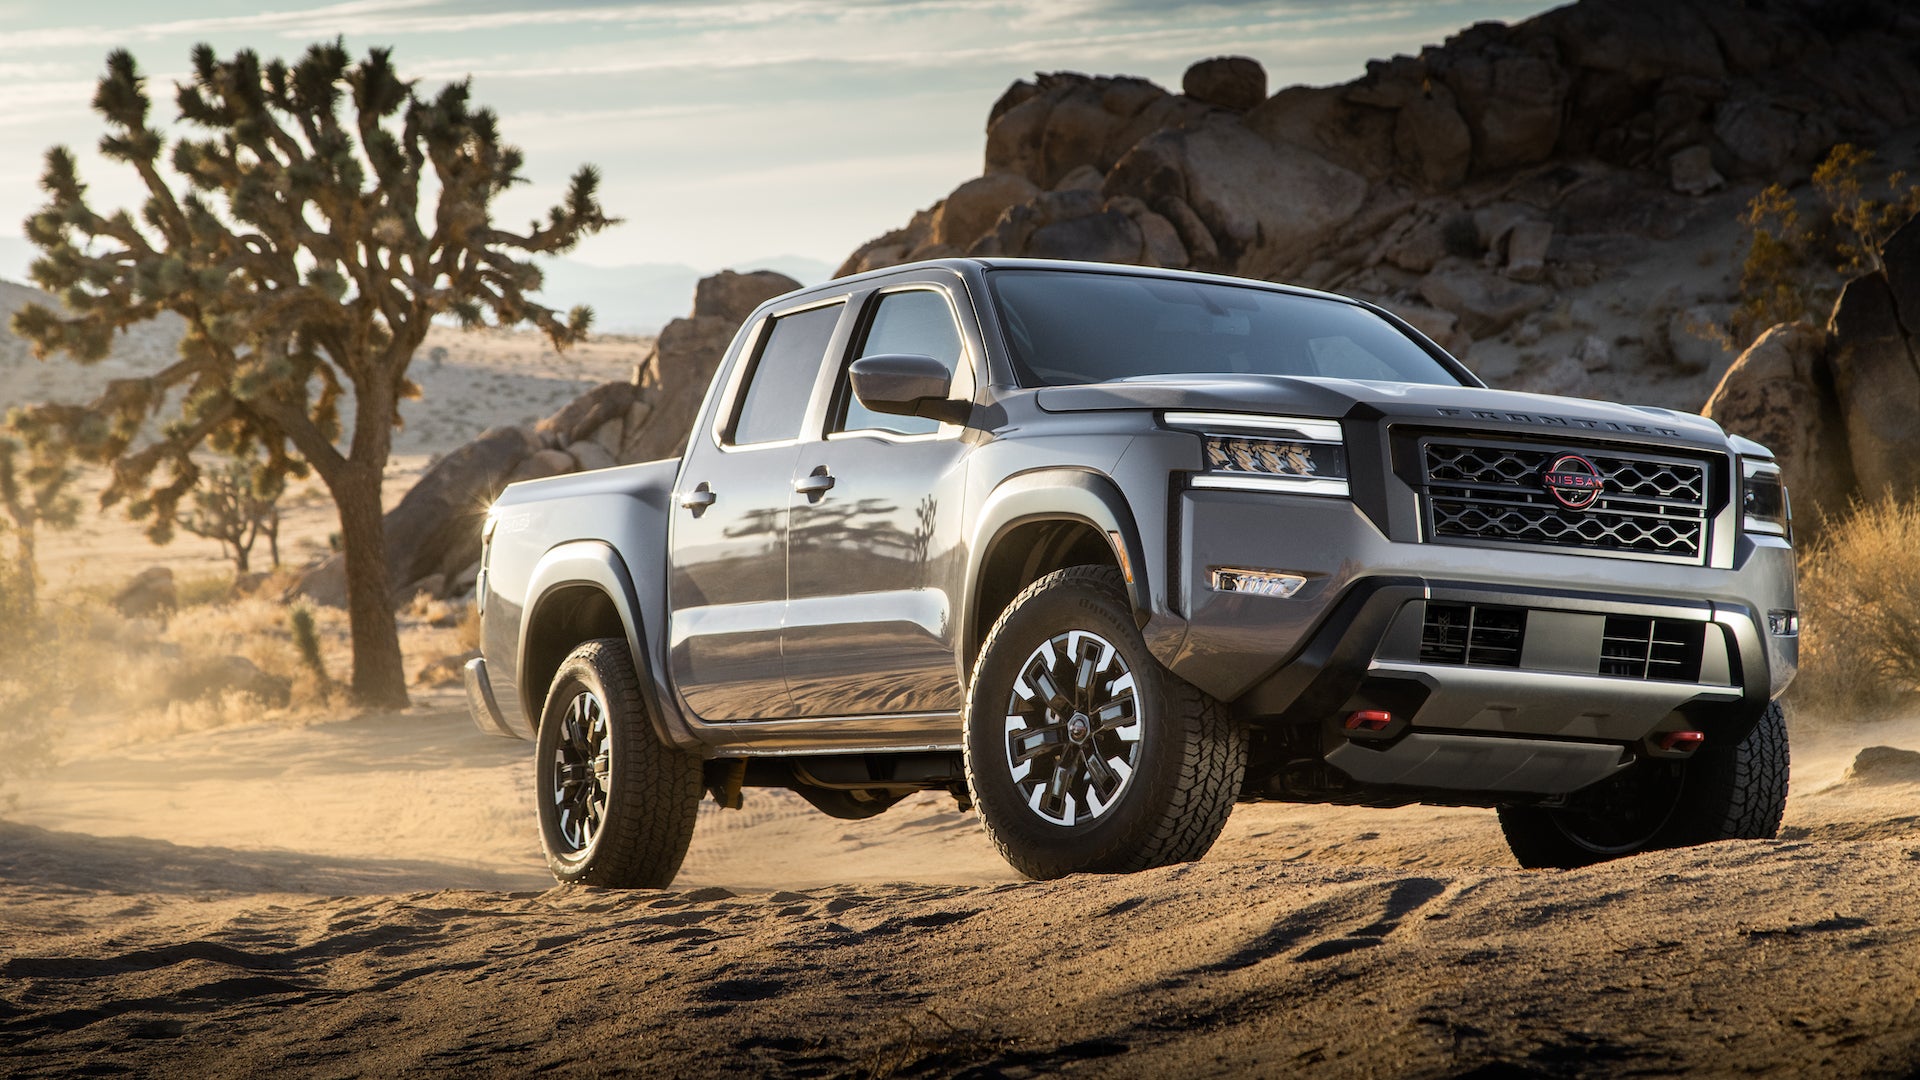 2022 Nissan Frontier: Finally, America Gets an (Almost) New Truck